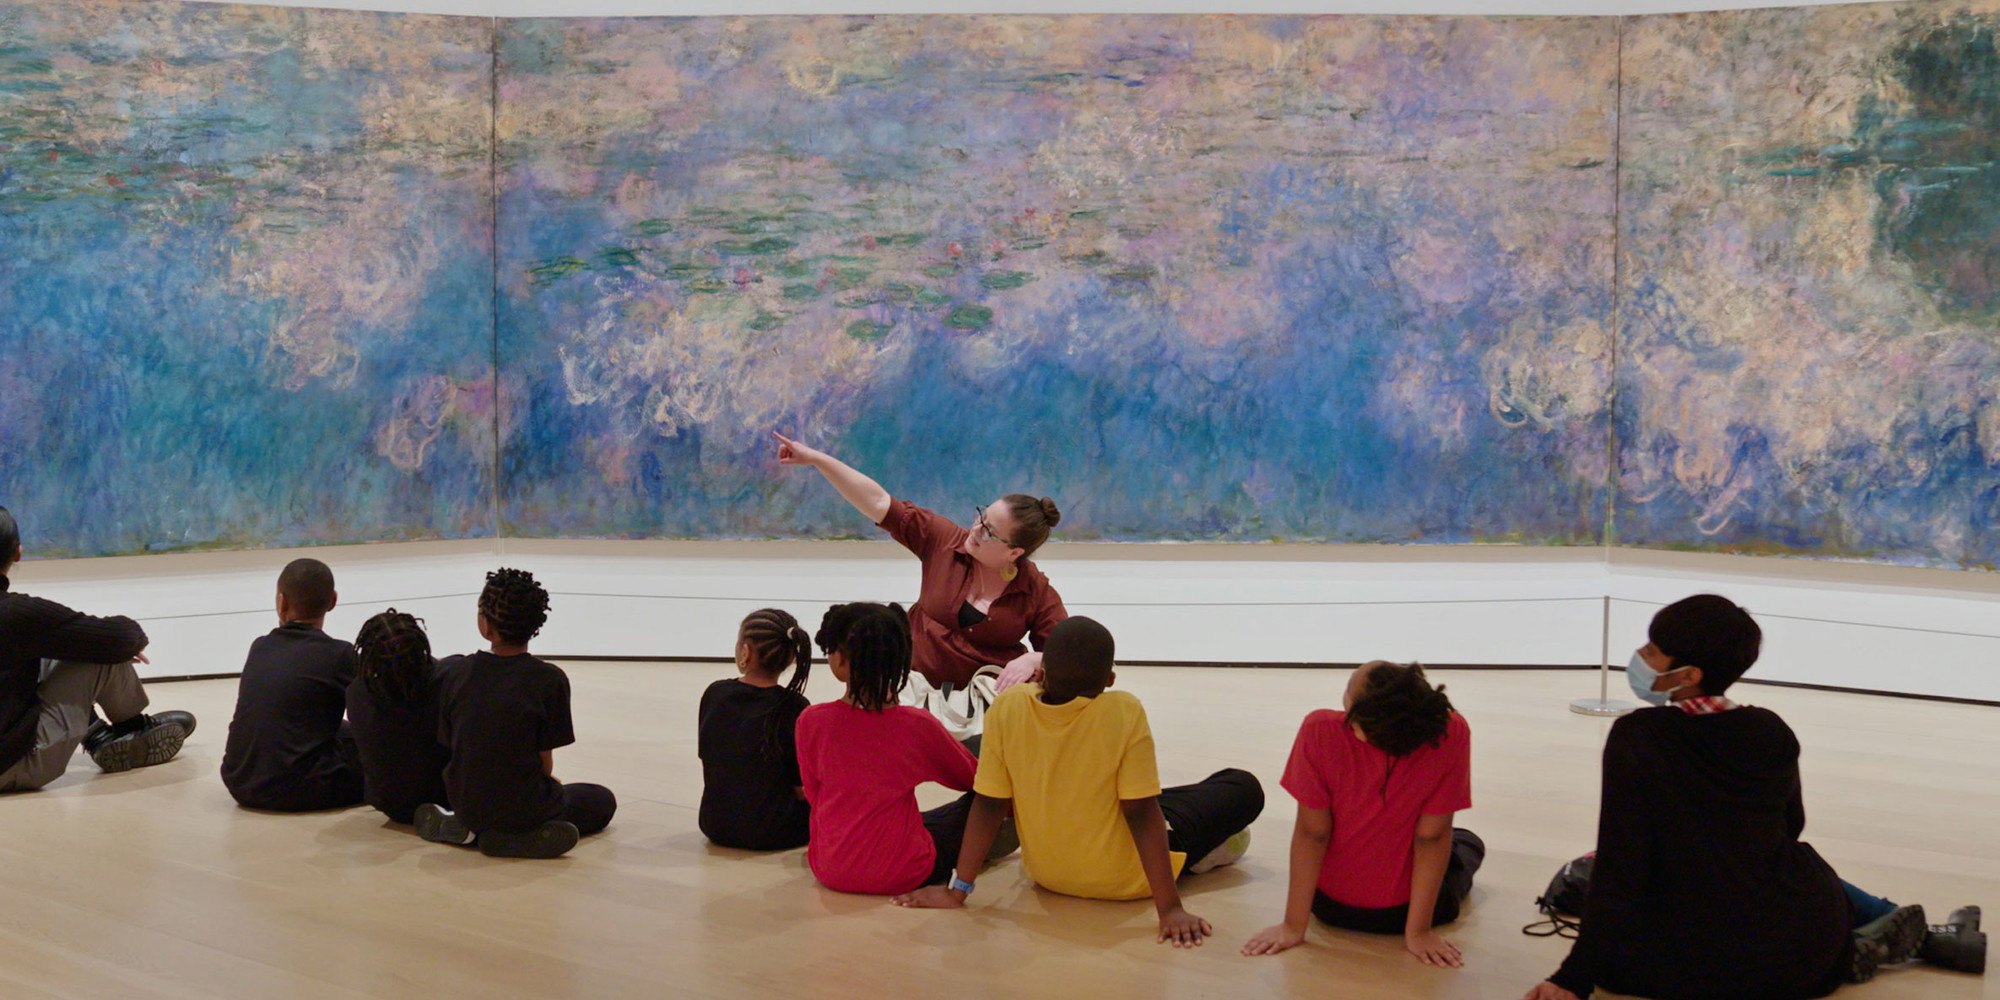 A still from the video Art as a Tool for Social and Emotional Learning. © 2024 The Museum of Modern Art, New York. Shown: Claude Monet. Water Lilies. 1914–26. Oil on canvas, three panels, each 6&#39; 6 3/4&#34; × 13&#39; 11 1/4&#34; (200 × 424.8 cm), overall 6&#39; 6 3/4&#34; × 41&#39; 10 3/8&#34; (200 × 1276 cm). The Museum of Modern Art, New York. Mrs. Simon Guggenheim Fund